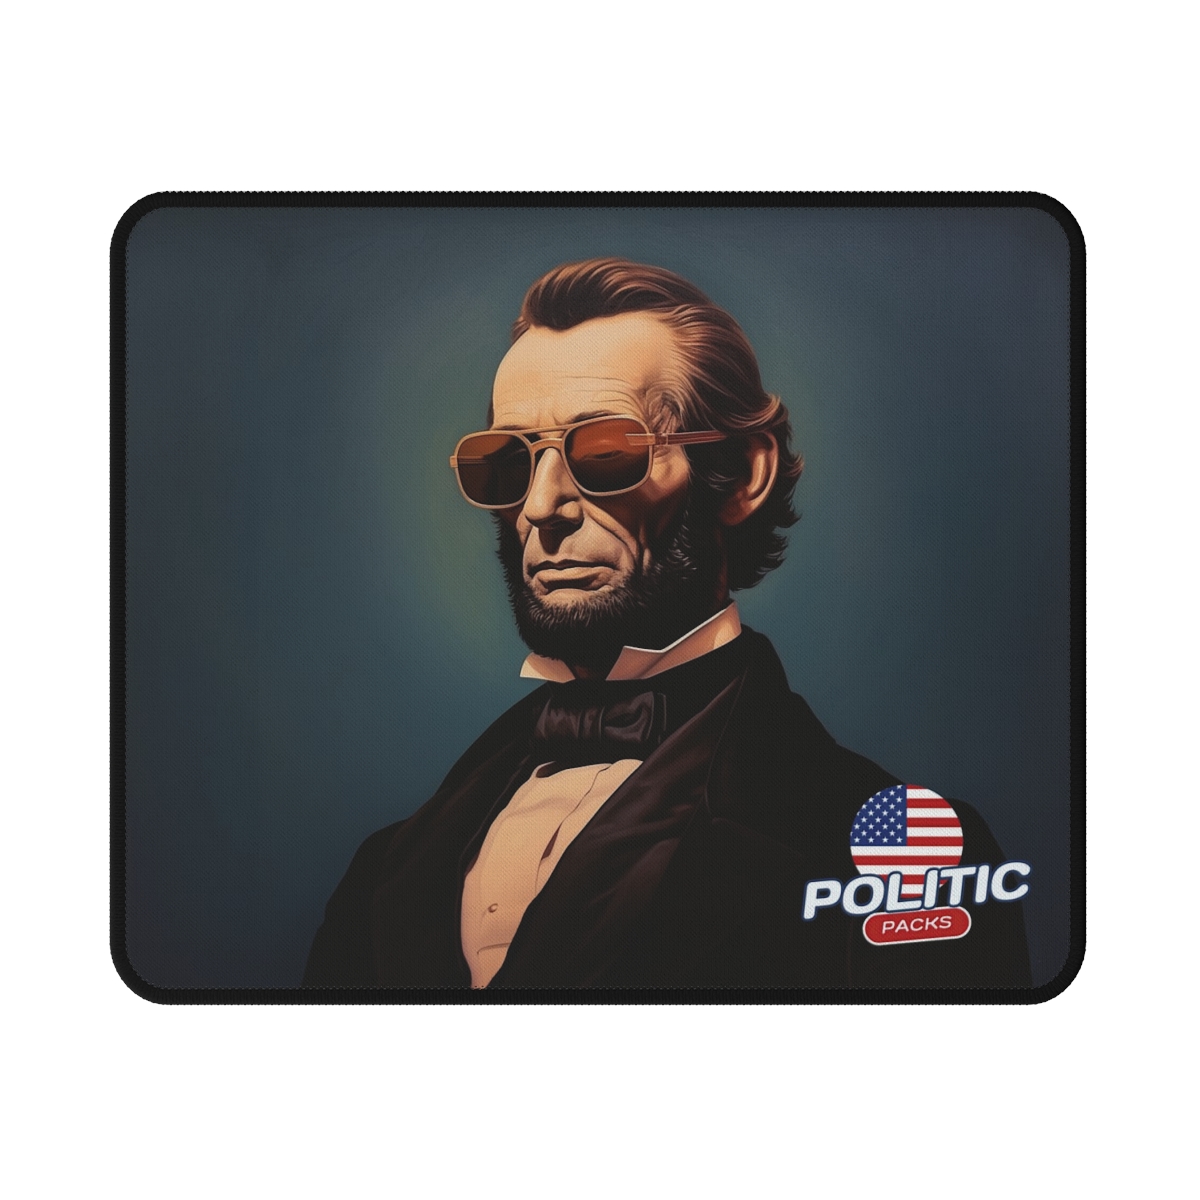 Abraham Lincoln Legacy Mouse Pad – Politic Packs Edition